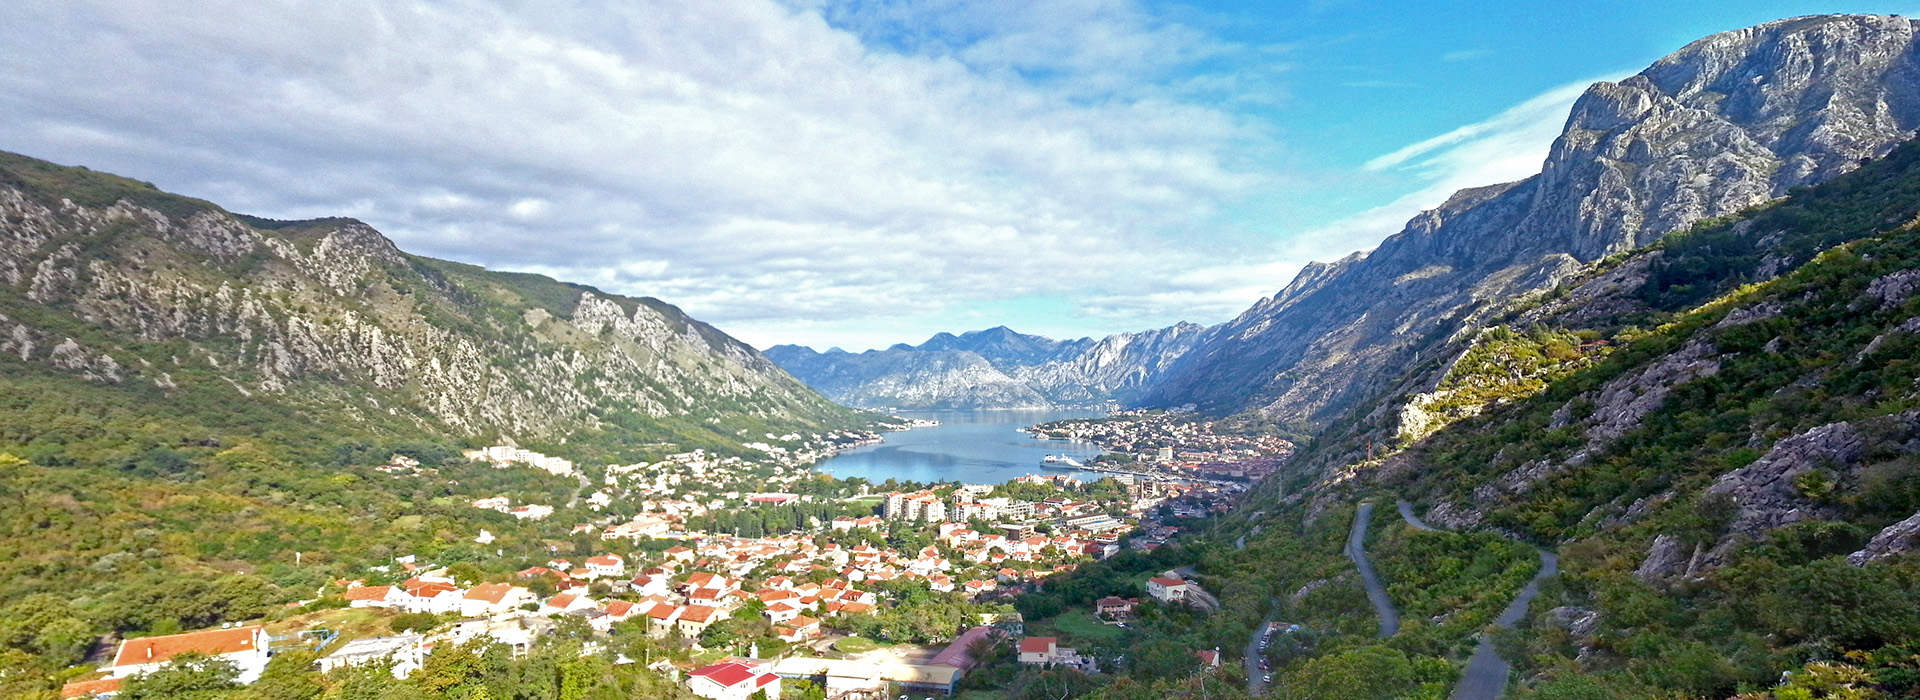 The Peaks of the Balkans walking guided holiday - Bay of Kotor